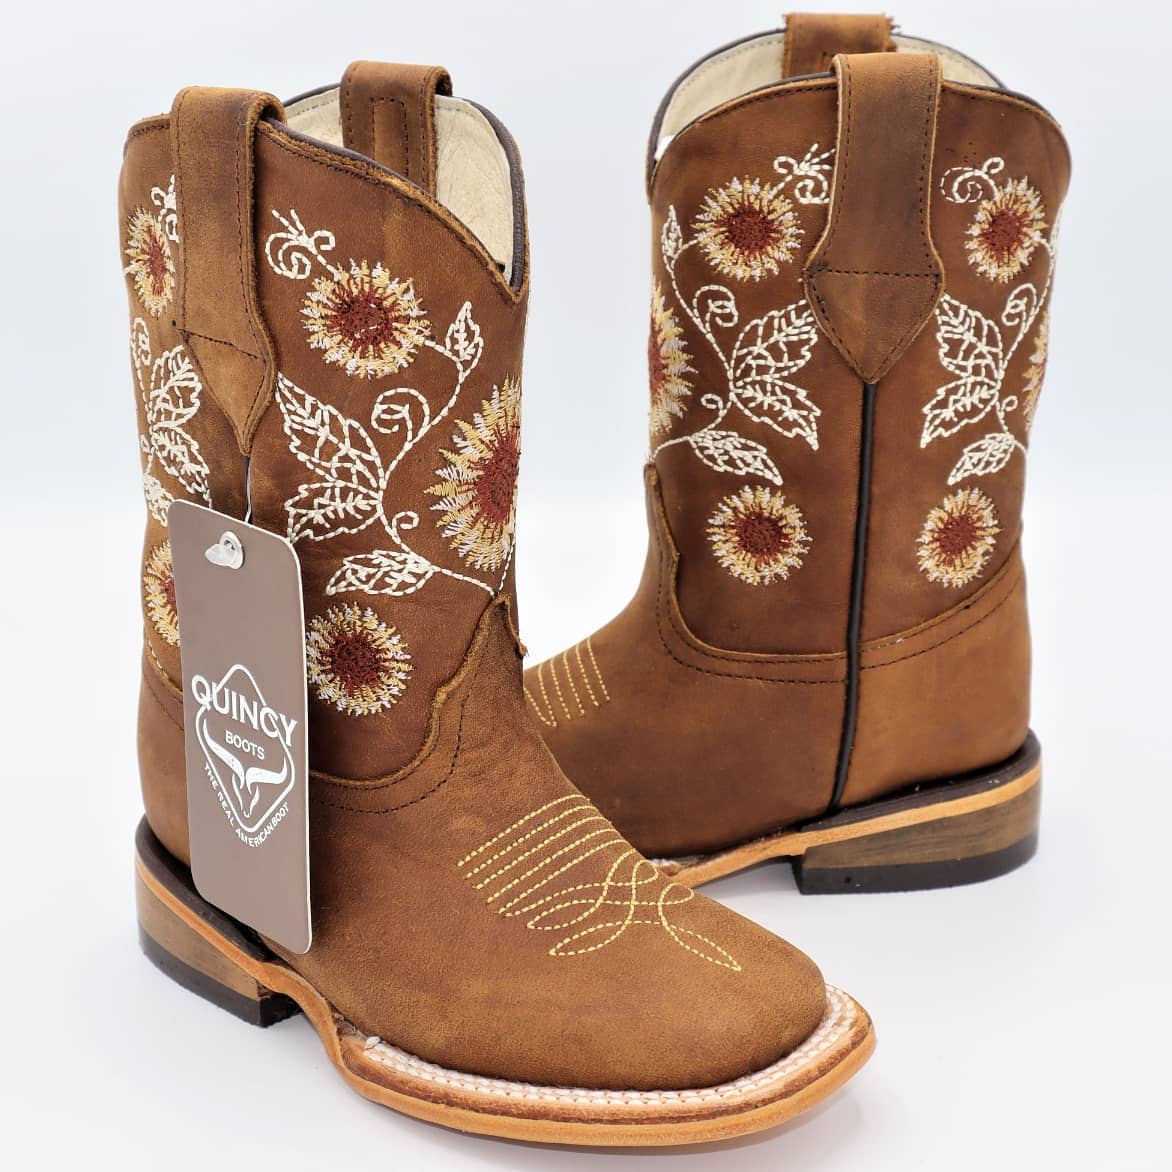 Sunflower Girls Cowboy Boots by Quincy Boots